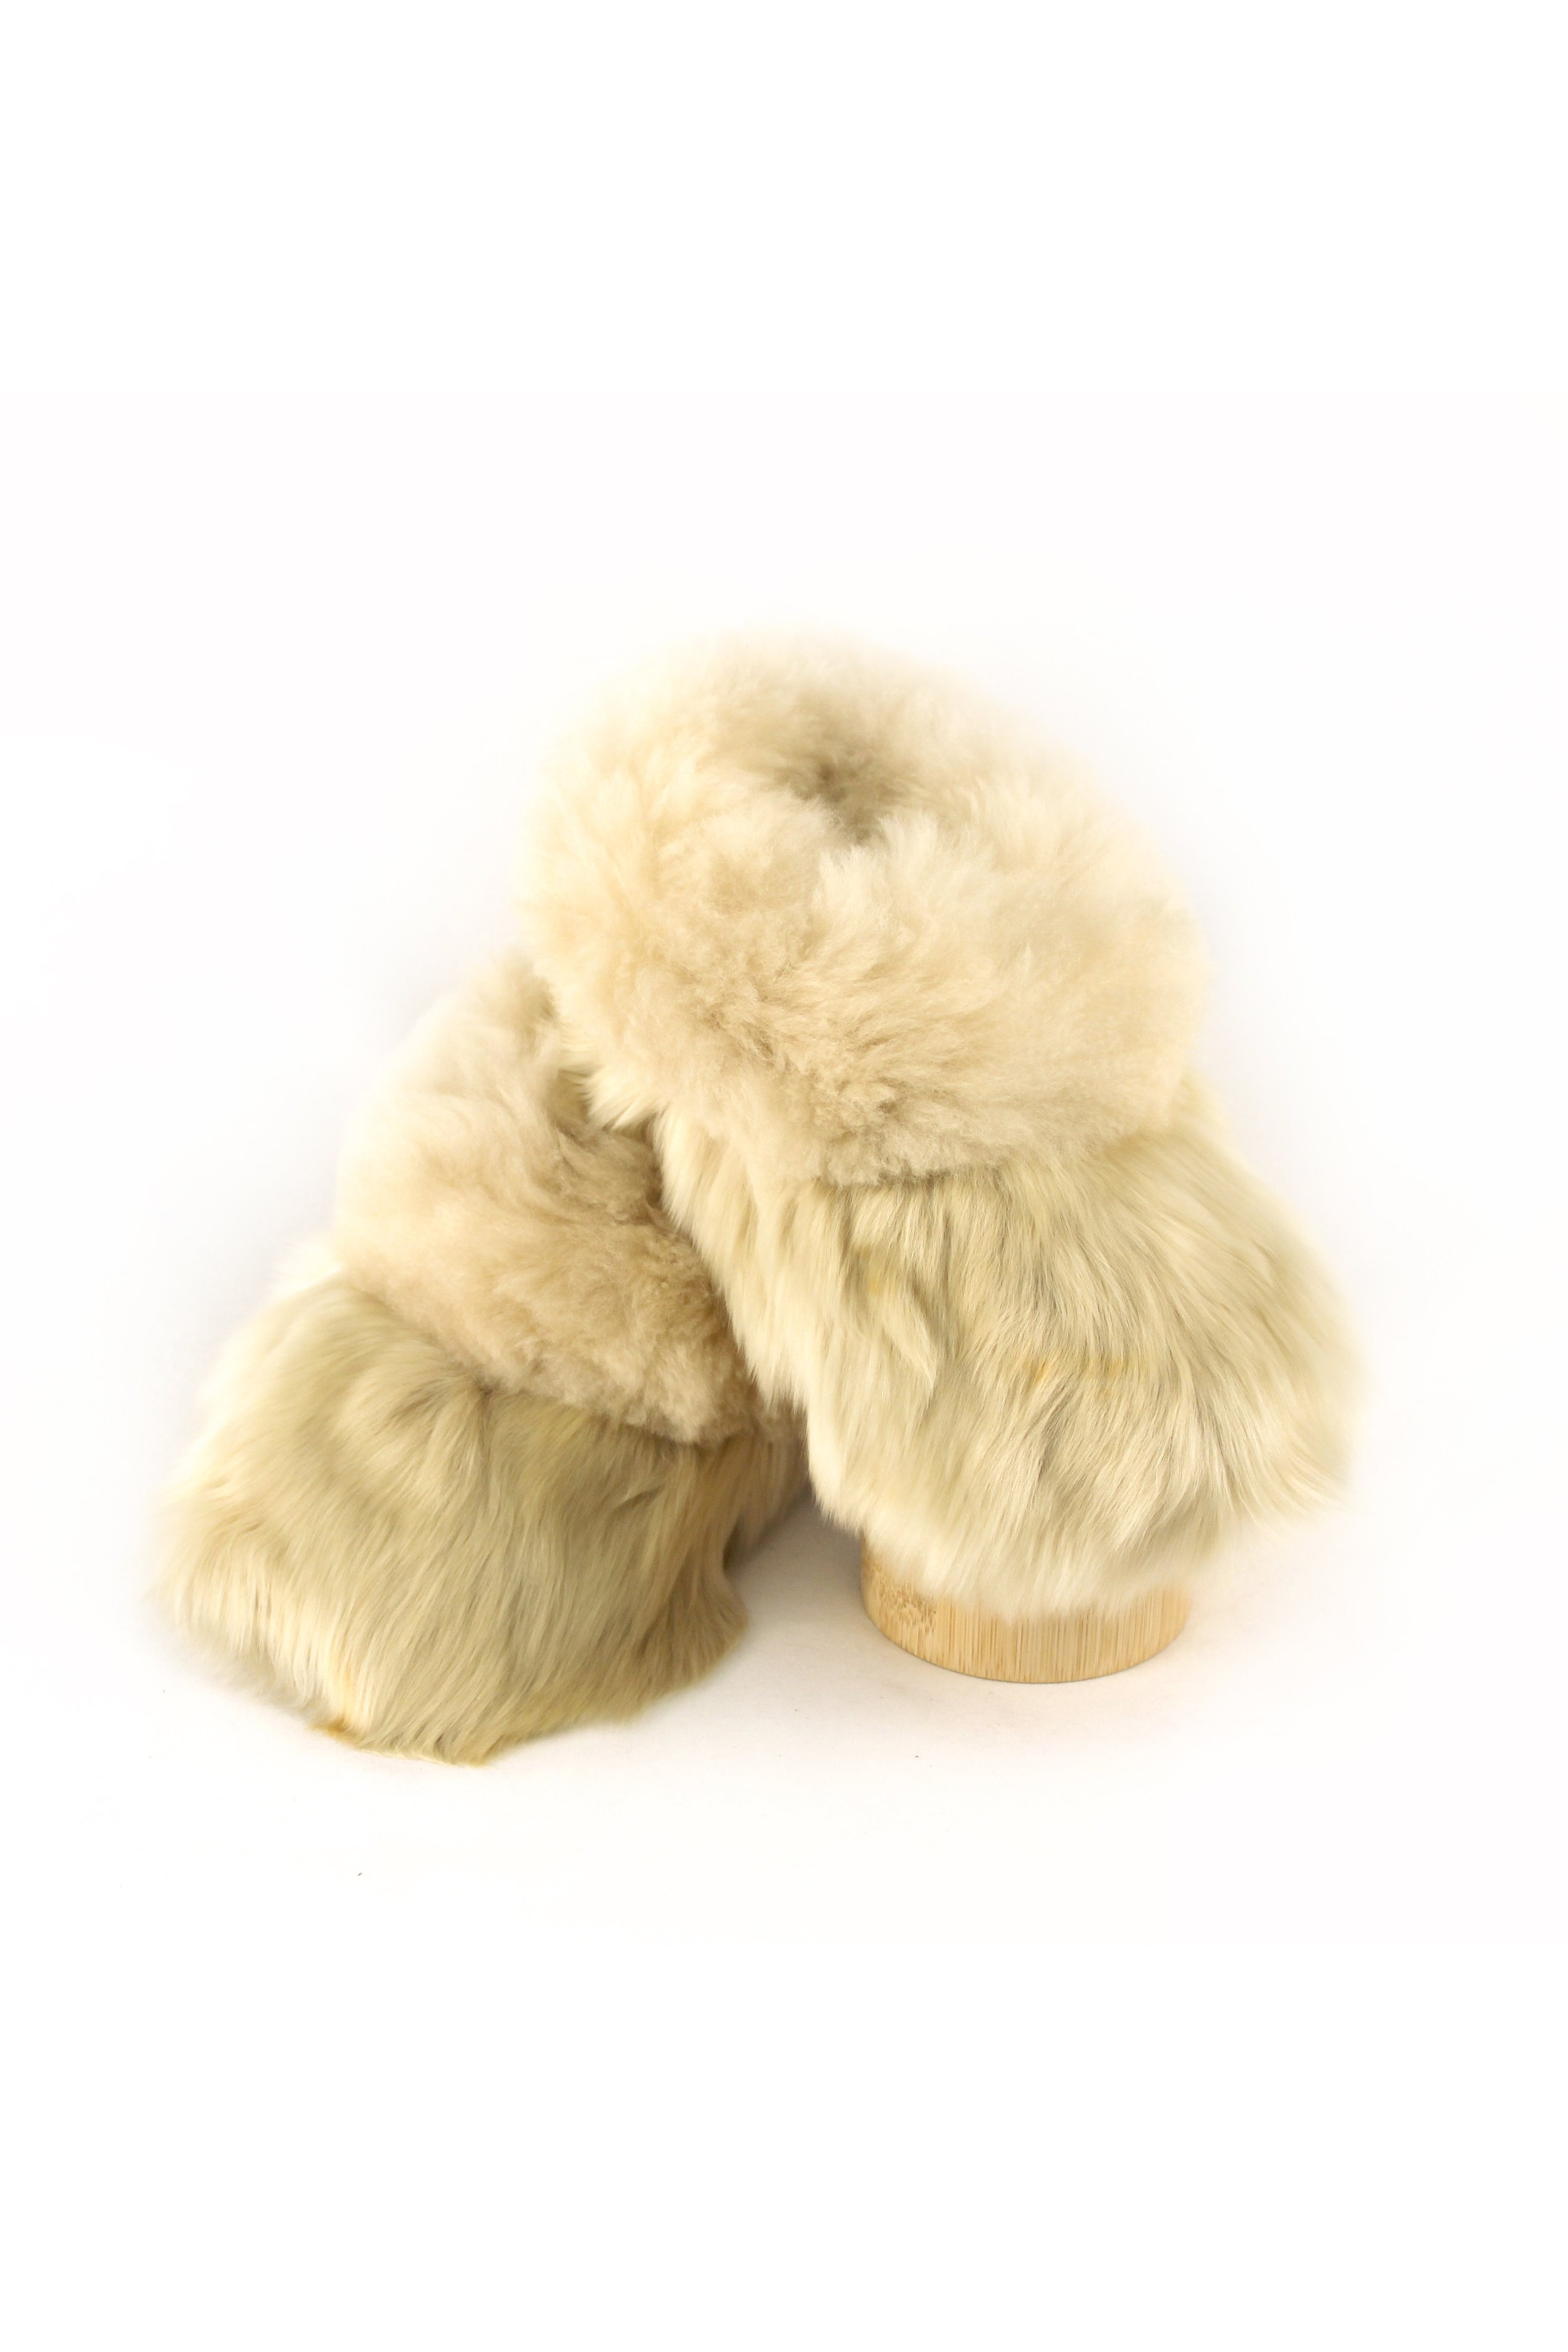 FREE SHIPPING USA Canada Europe Best Alpaca Slippers Unisex - Etsy |  Sleeping outfit, Alpaca slippers, Alpaca leather